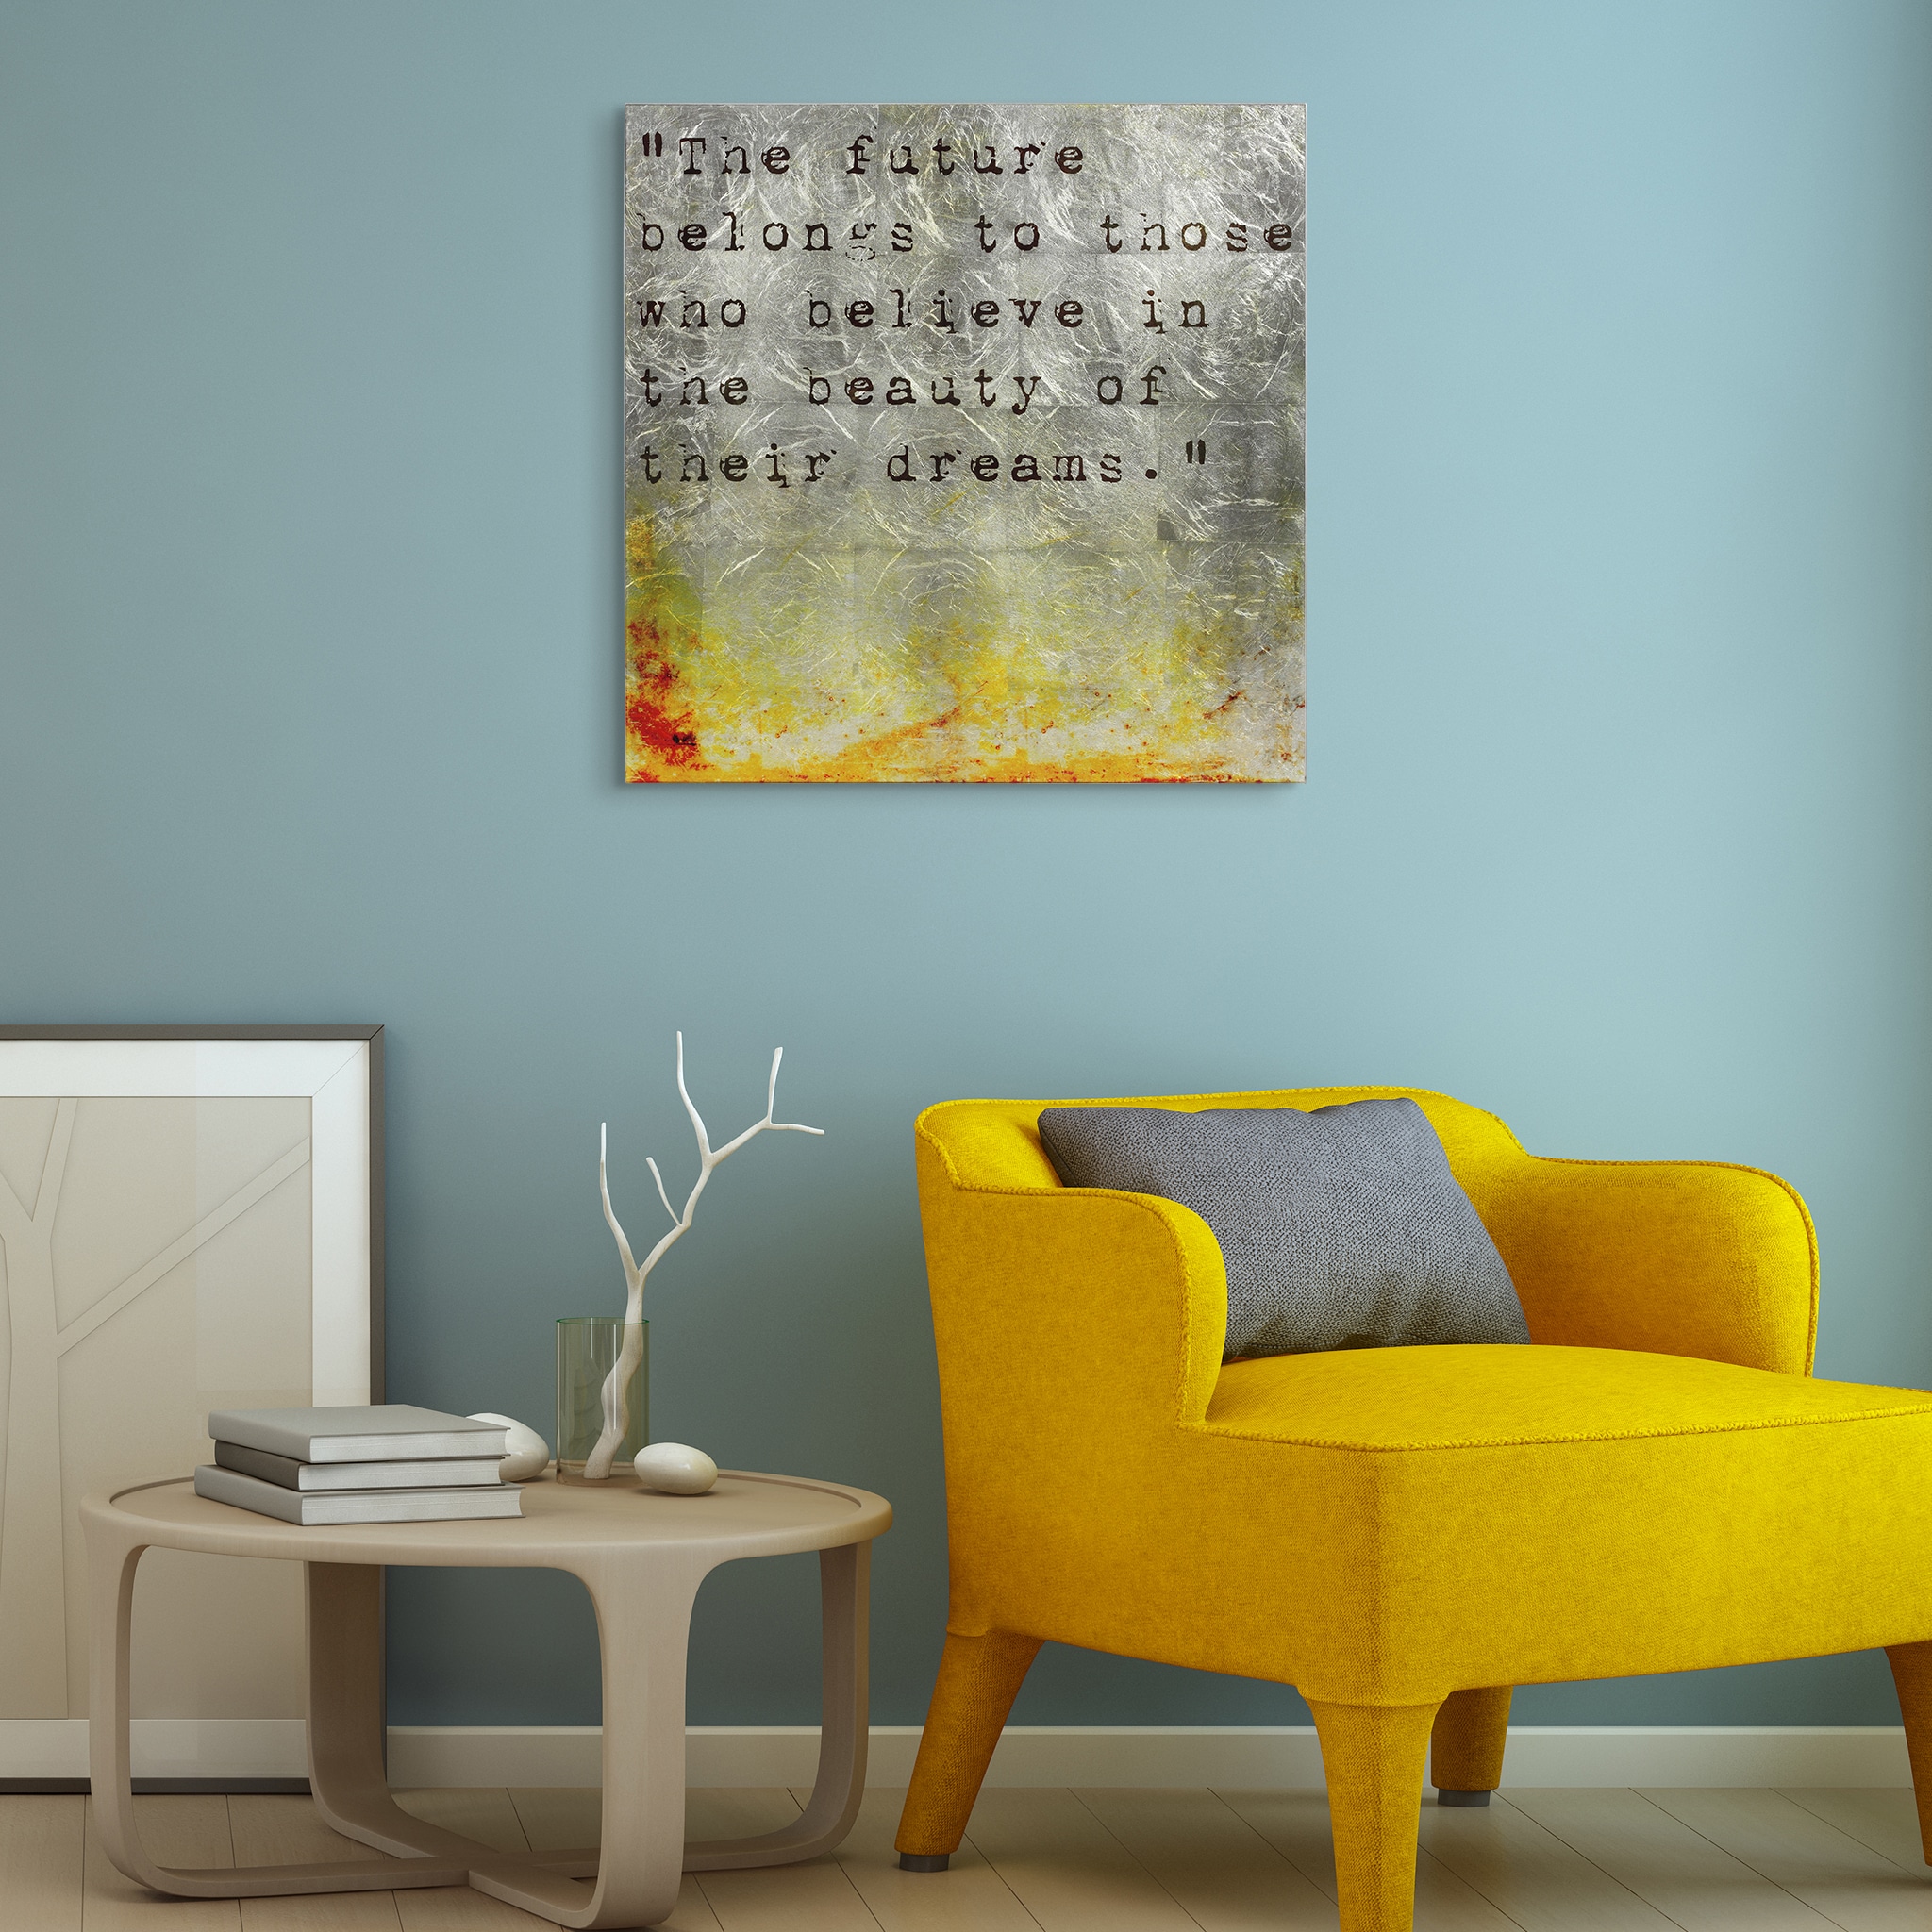 Empire Art Direct 24-in H x 24-in W Inspirational Glass Print at Lowes.com